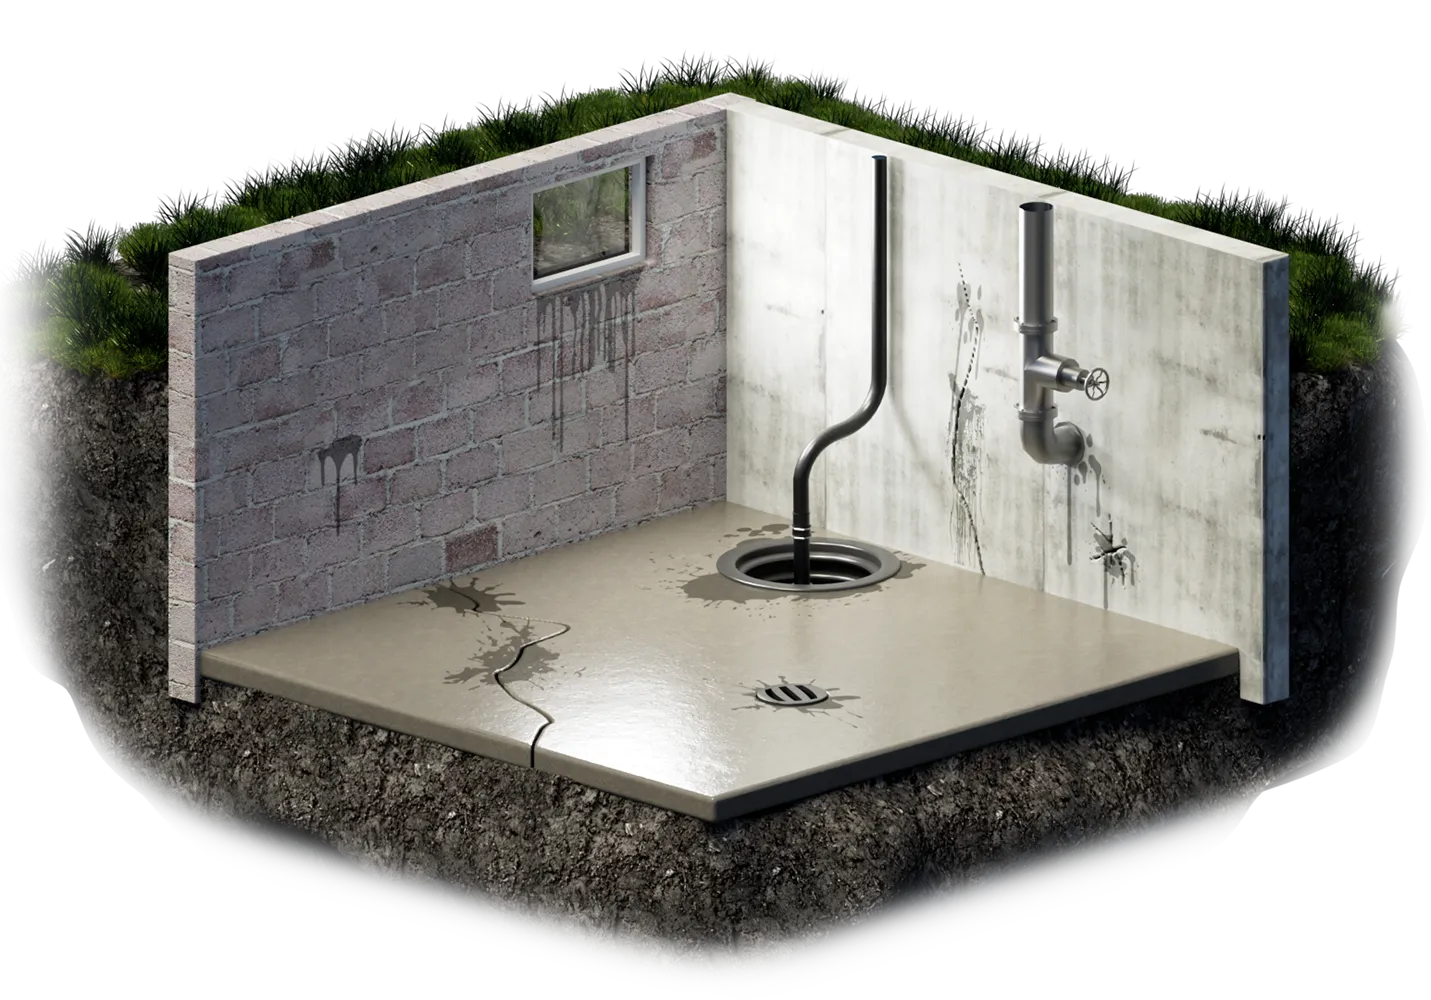 Cross-section view of a basement corner illustrating waterproofing issues: sump pump, floor and foundation cracks, window well leakage, mortar joint and sewer pipe leakage